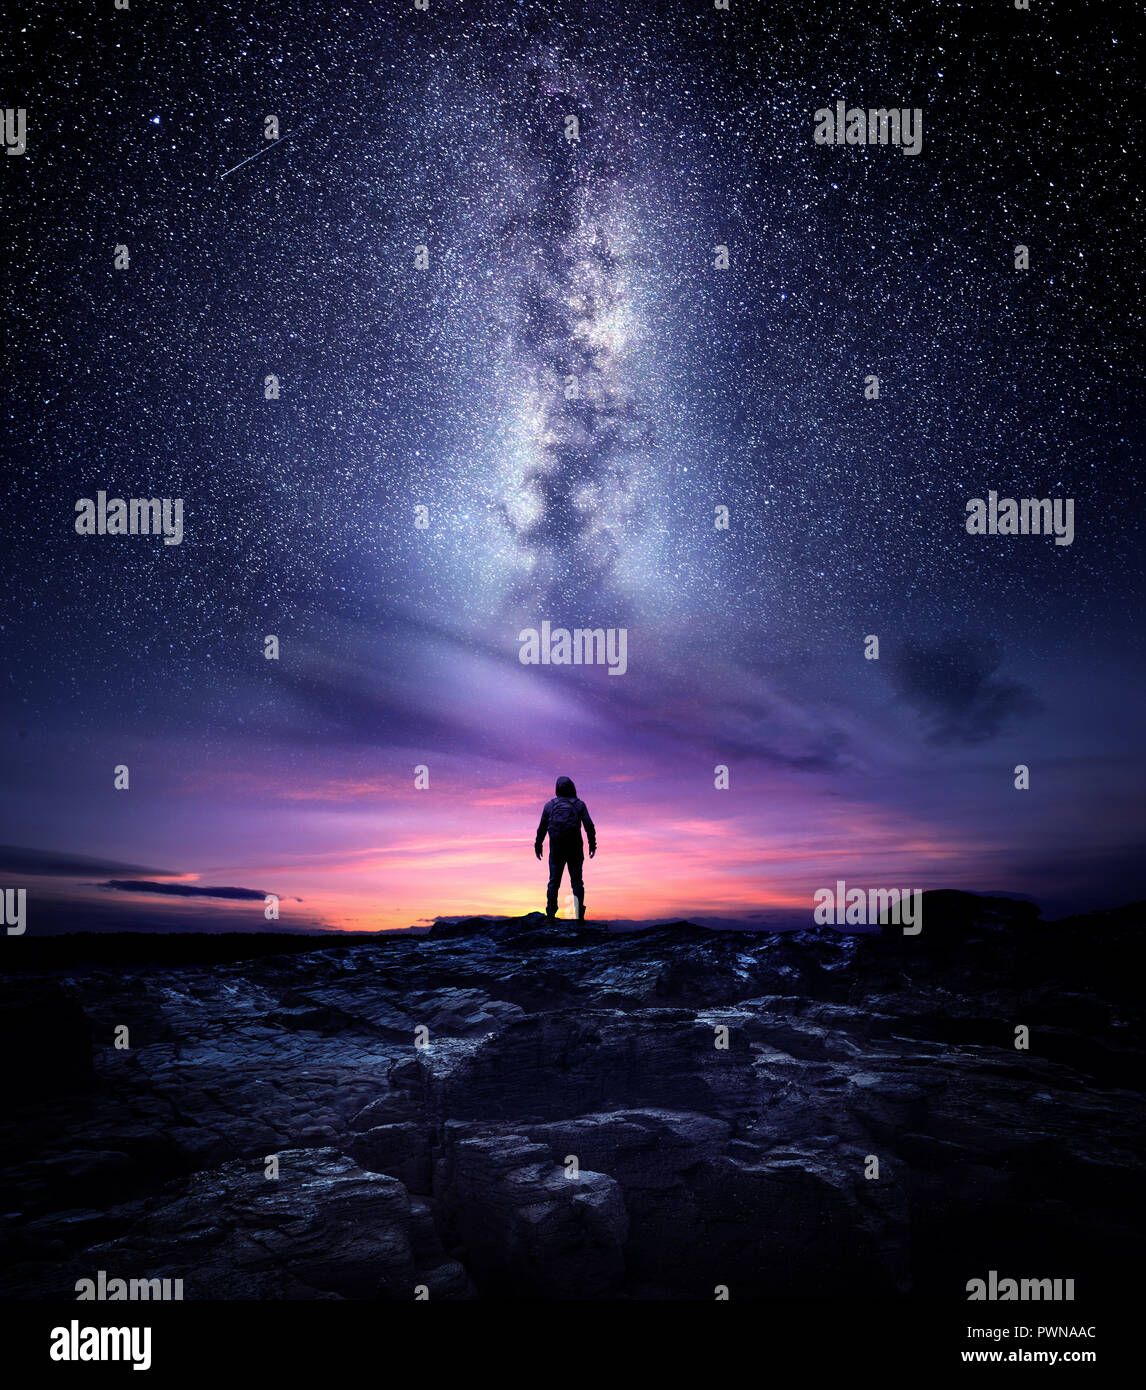 Night time long exposure landscape photography. A man standing in a high place looking up in wonder to the Milky Way galaxy, photo composite. Stock Photo